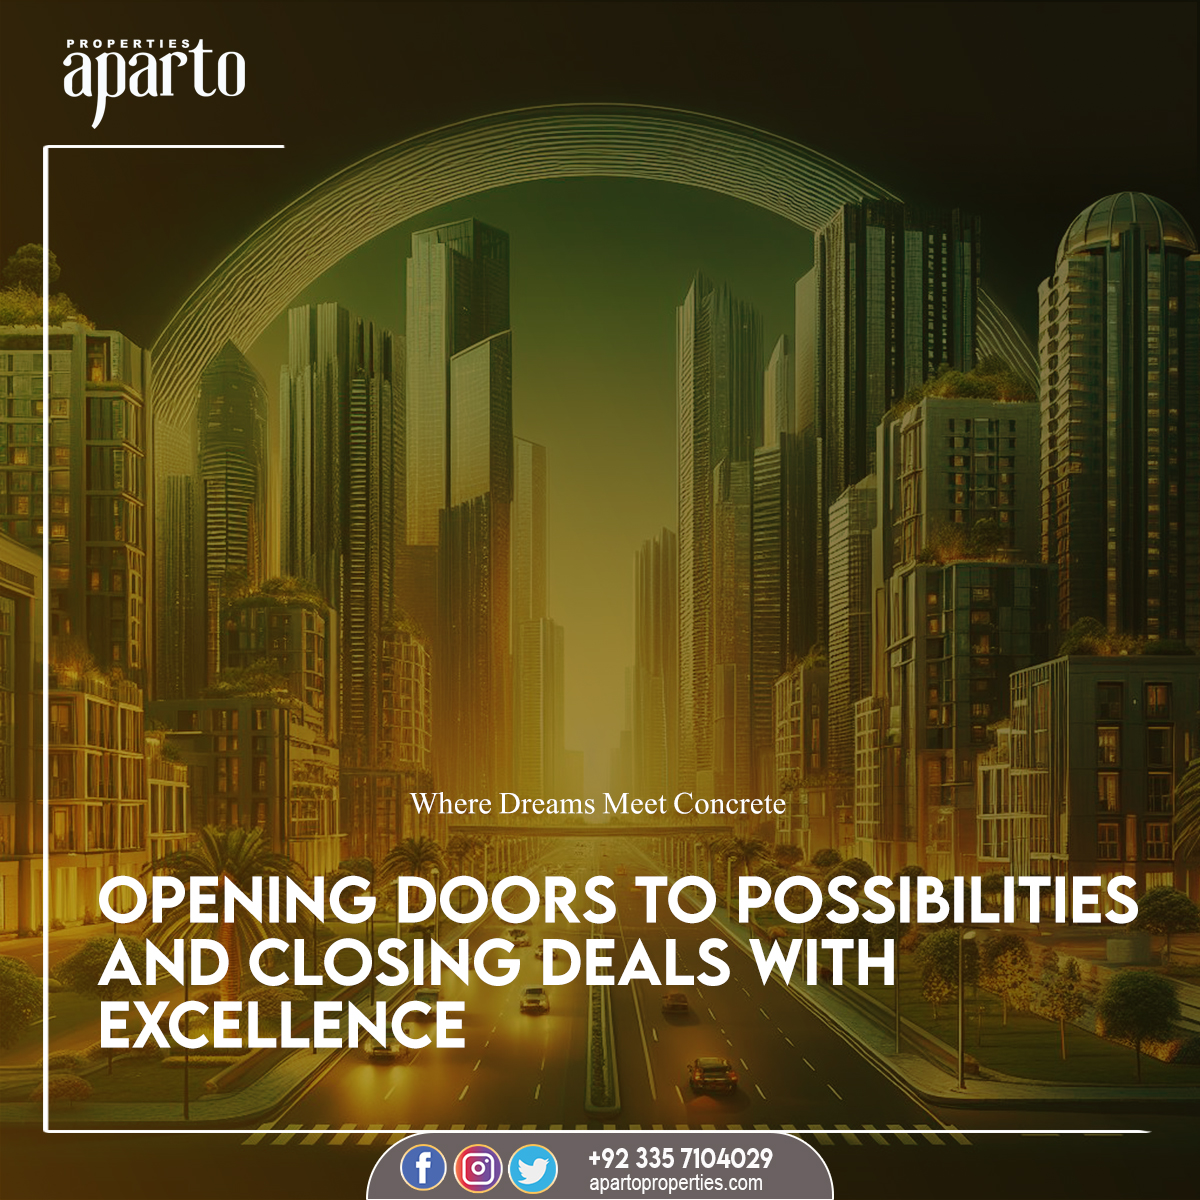 At  Aparto Properties, we're not just about finding you a place to live.

Please Contact:
Aparto Properties
UAN: 0335 7104029

#aparto #properties #apartoproperties #realestate #RealEstateInvesting #HigherROI #returnoninvestment #pakistanproperty #propertyinpakistan #property